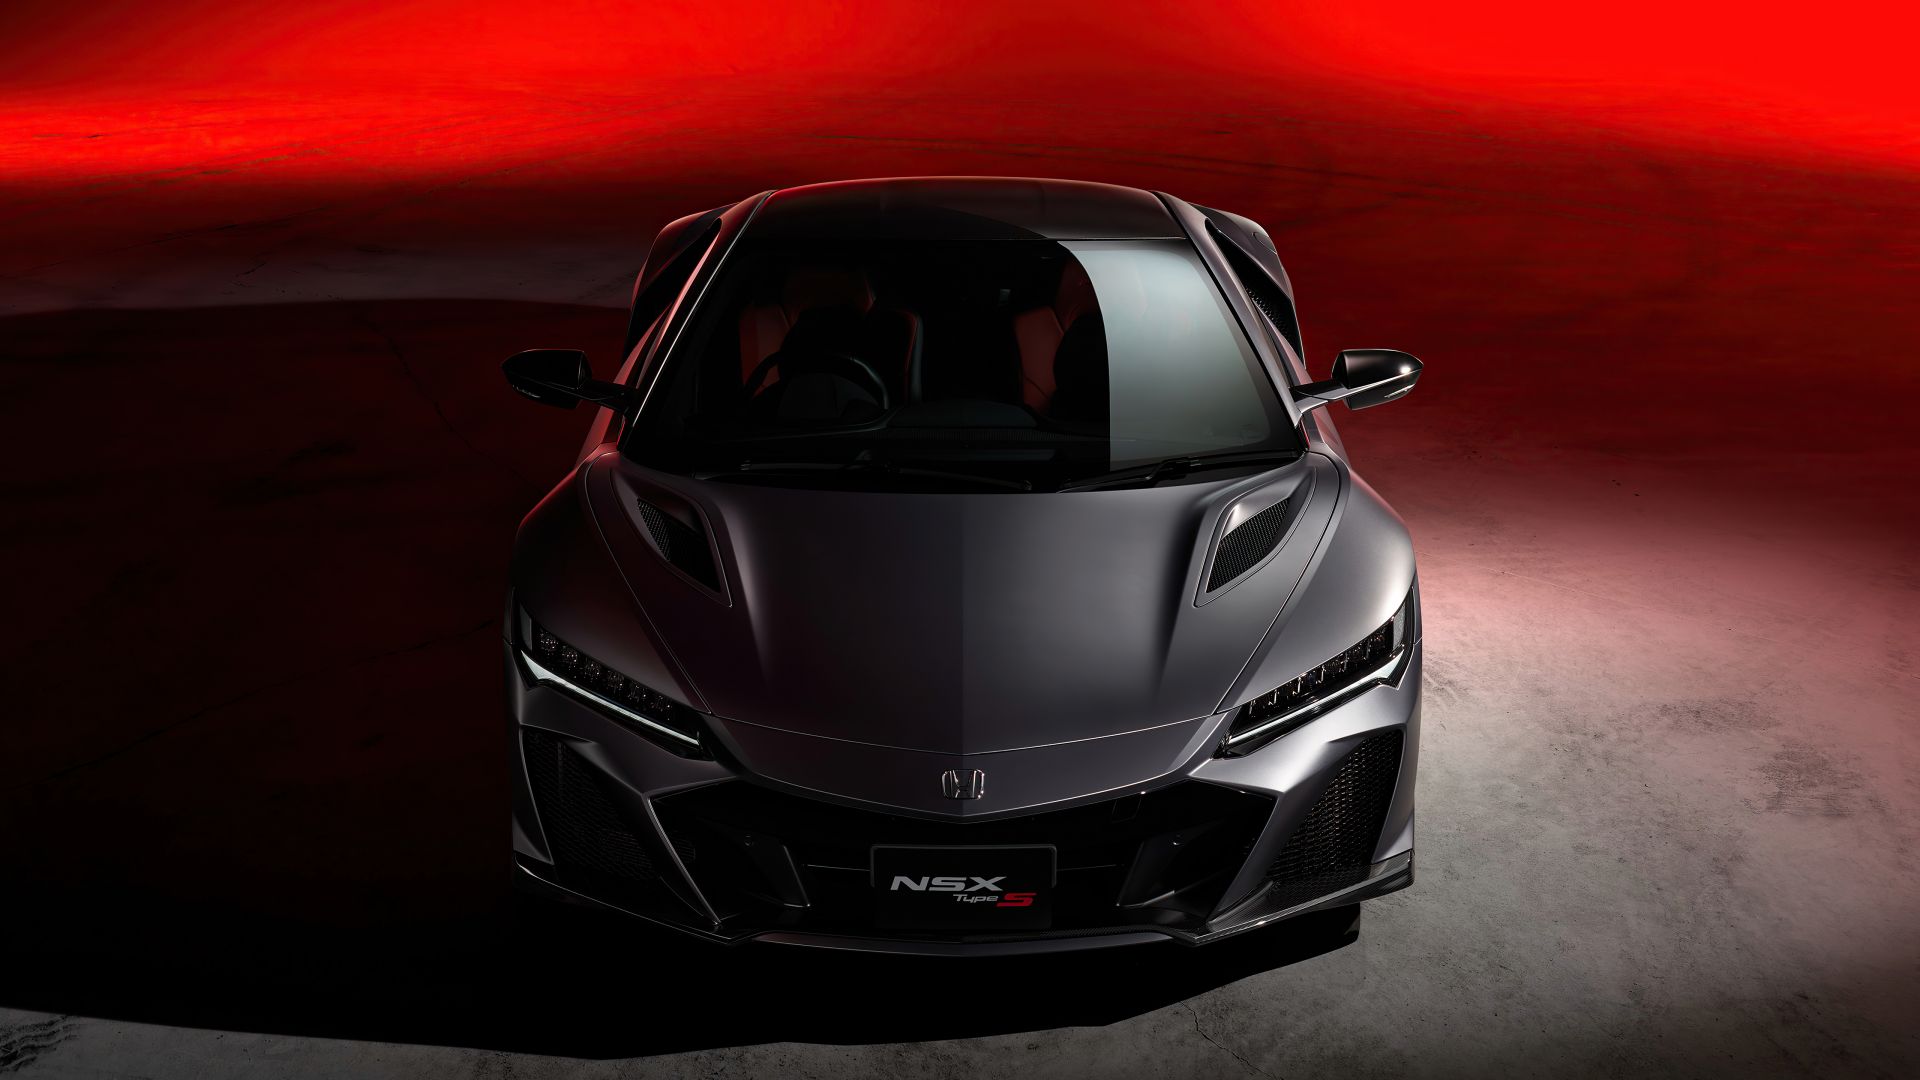 2022 honda nsx type s, black supercar wallpaper, HD image, picture, background, 8f6098